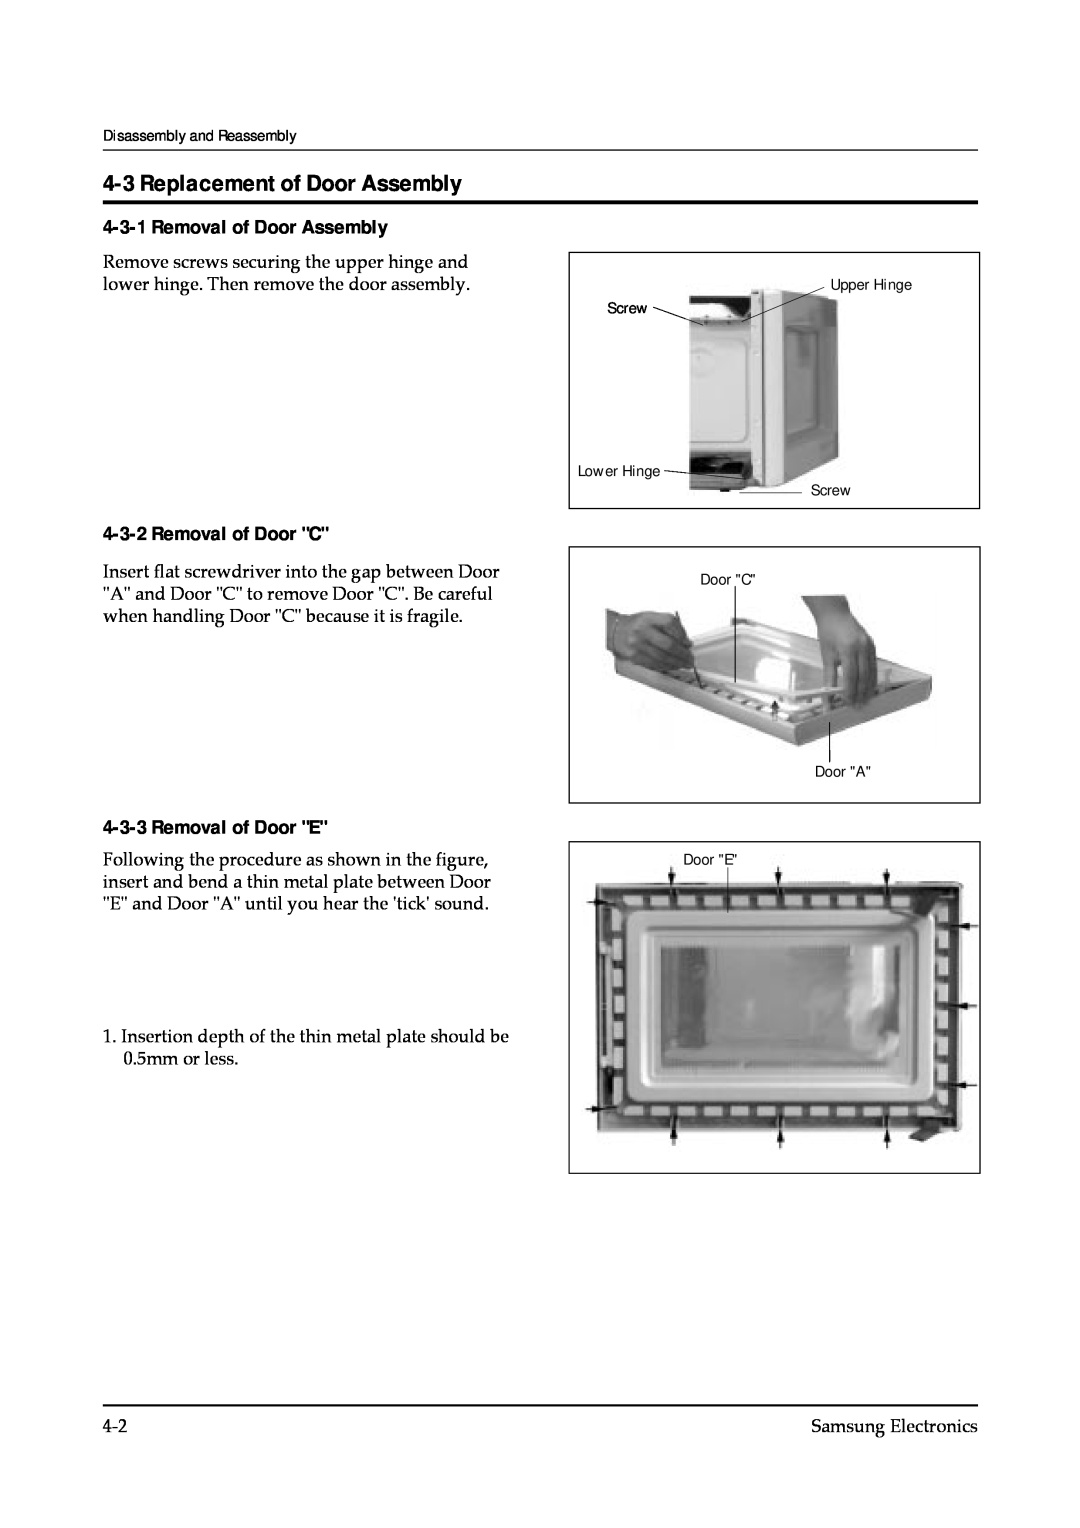 Samsung CE745GR service manual Replacement of Door Assembly, Removal of Door Assembly, Removal of Door C, Removal of Door E 